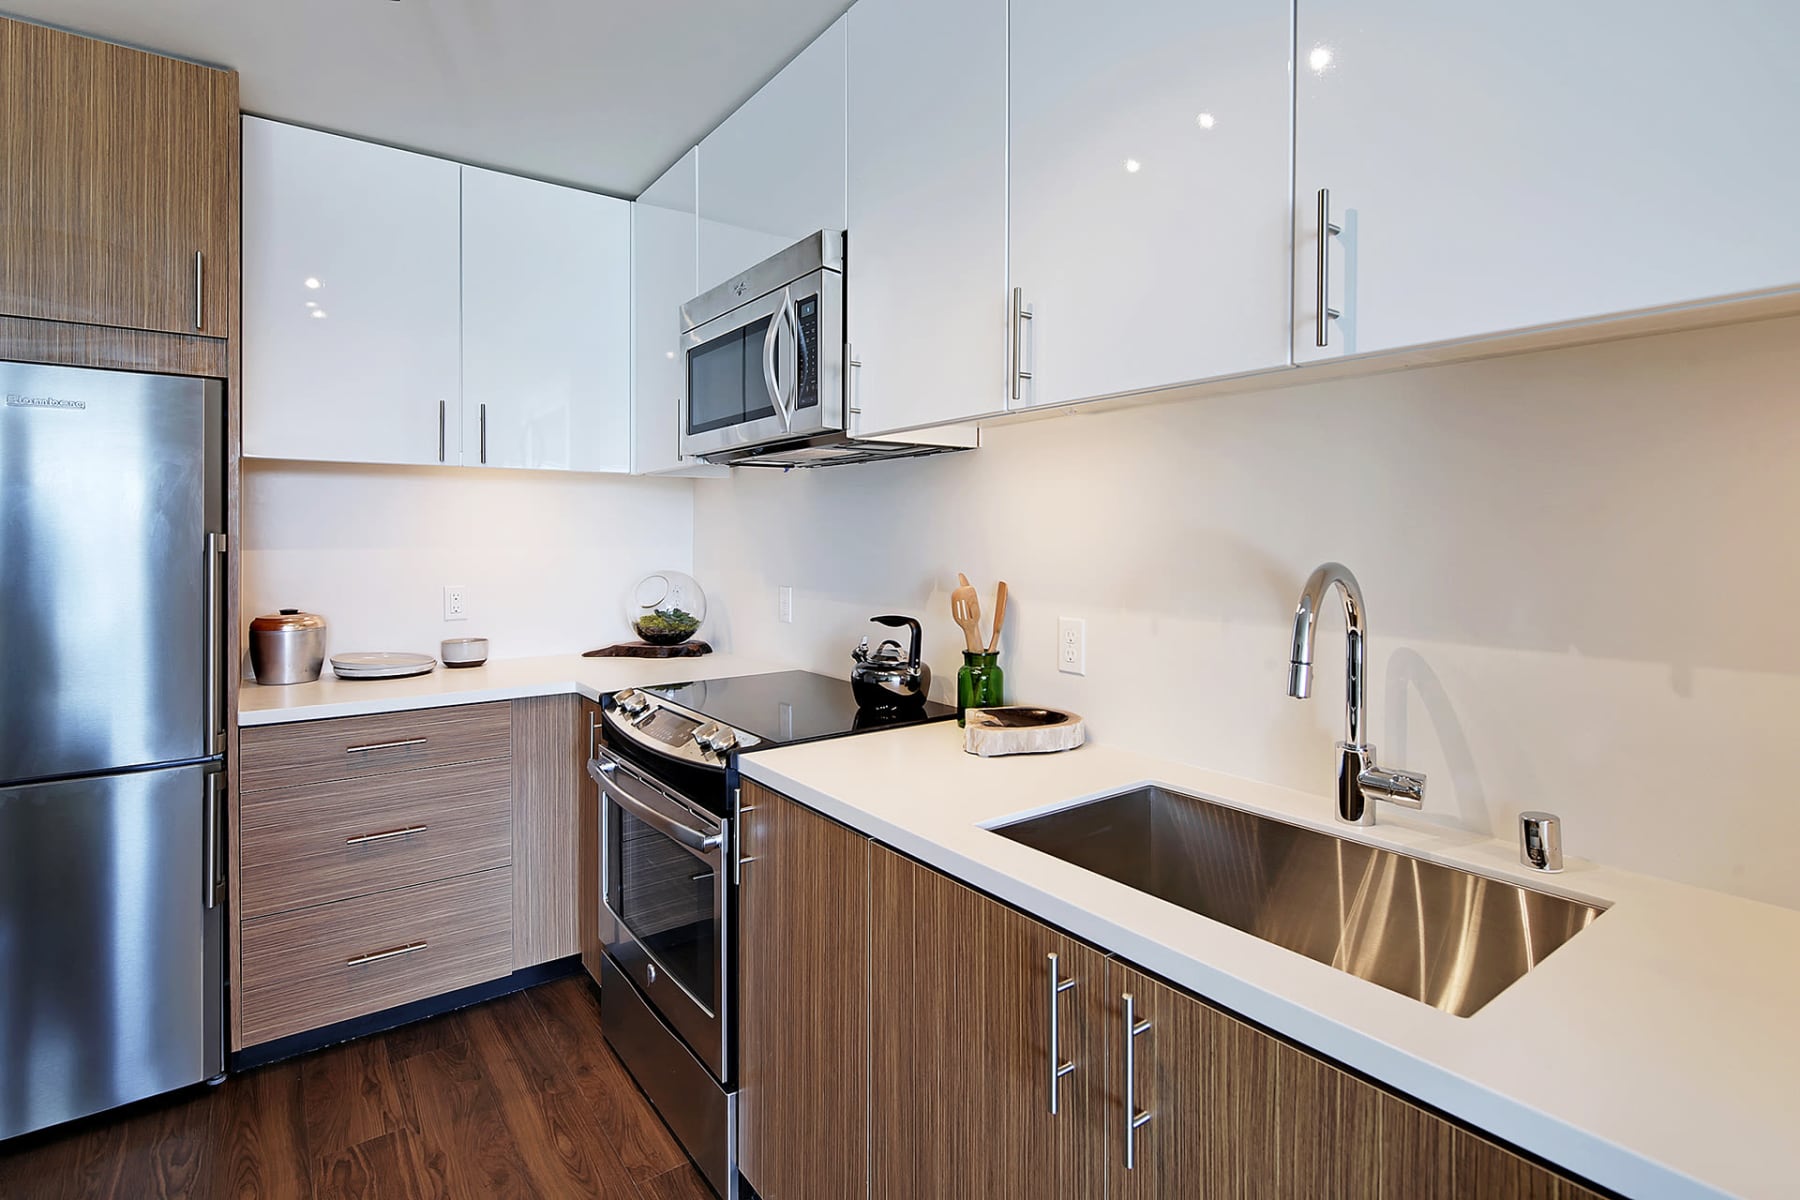 Kitchen at Rooster Apartments in Seattle, Washington